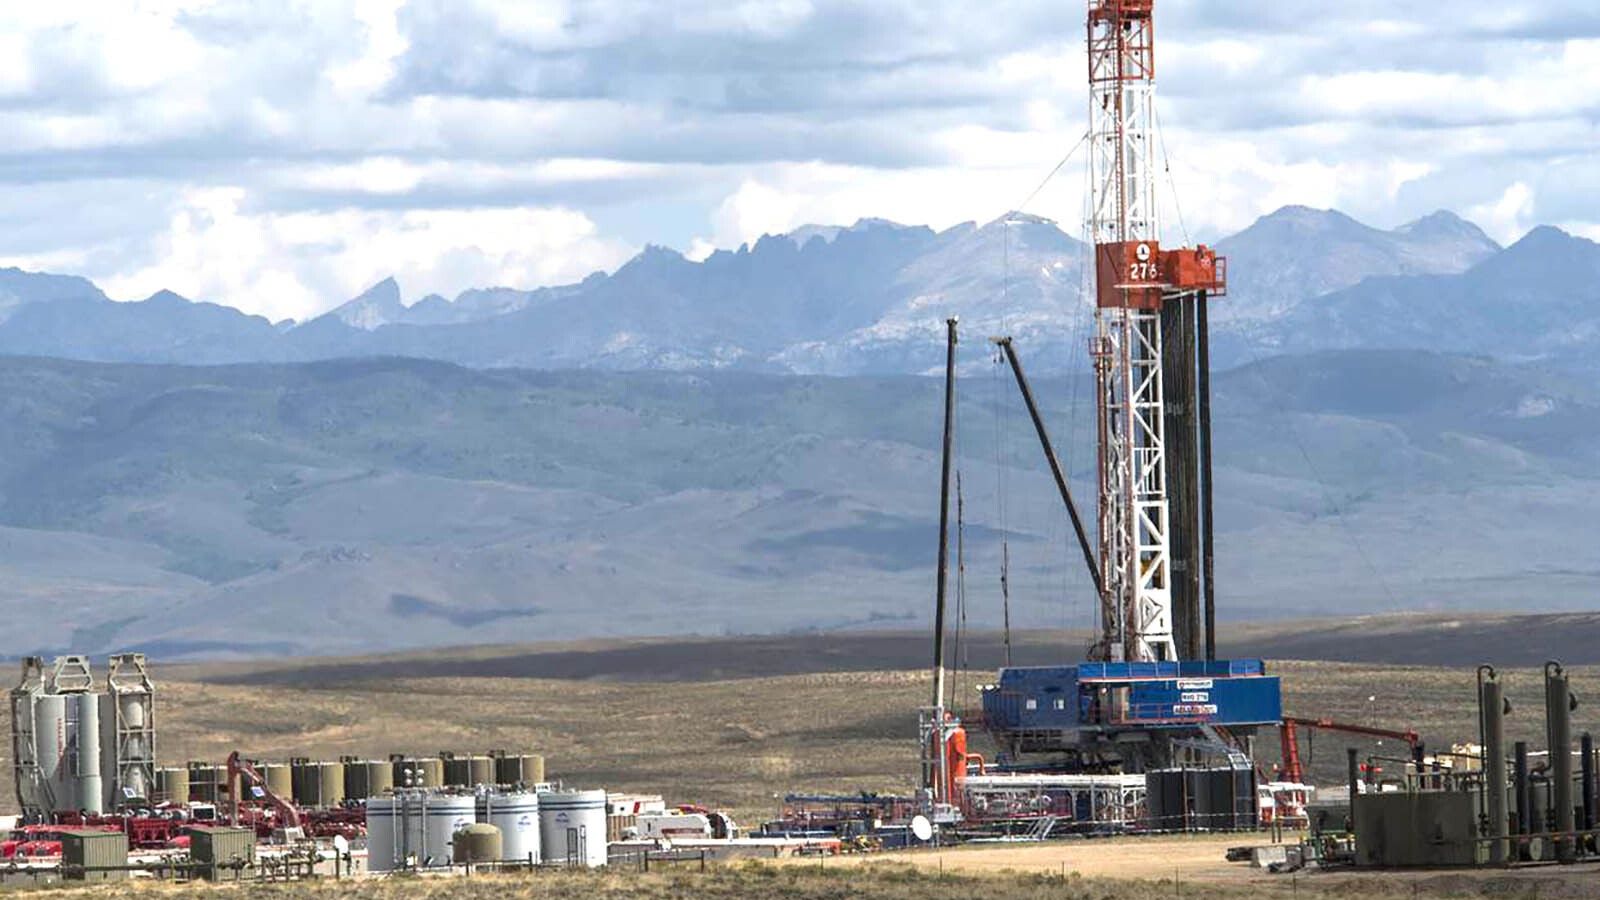 A drilling rig operates in a natural gas field near Pinedale, Wyoming.